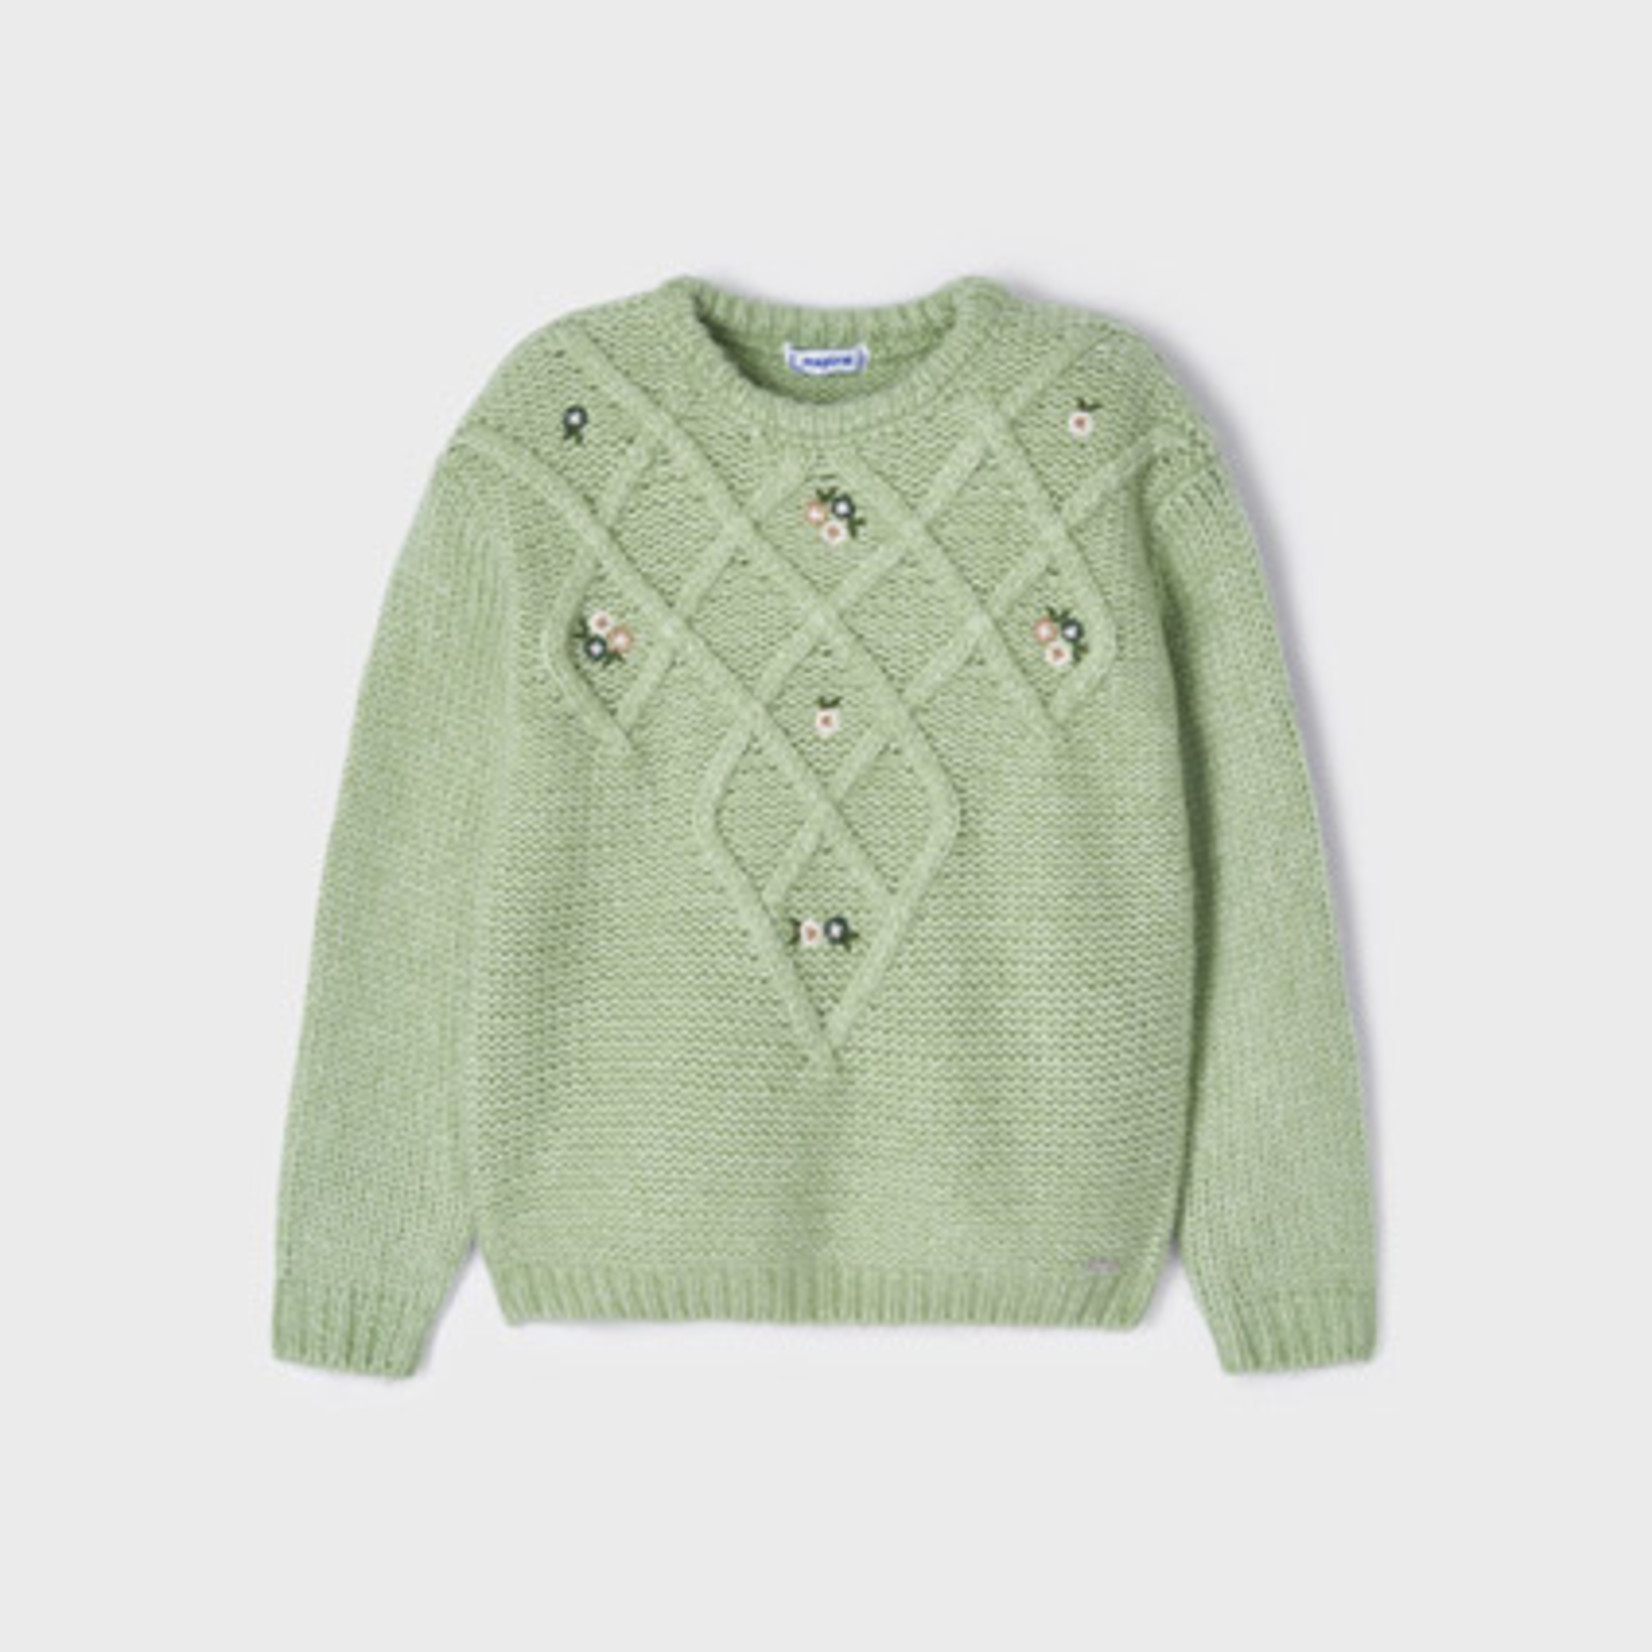 Mayoral Mayoral pull knitwear mint